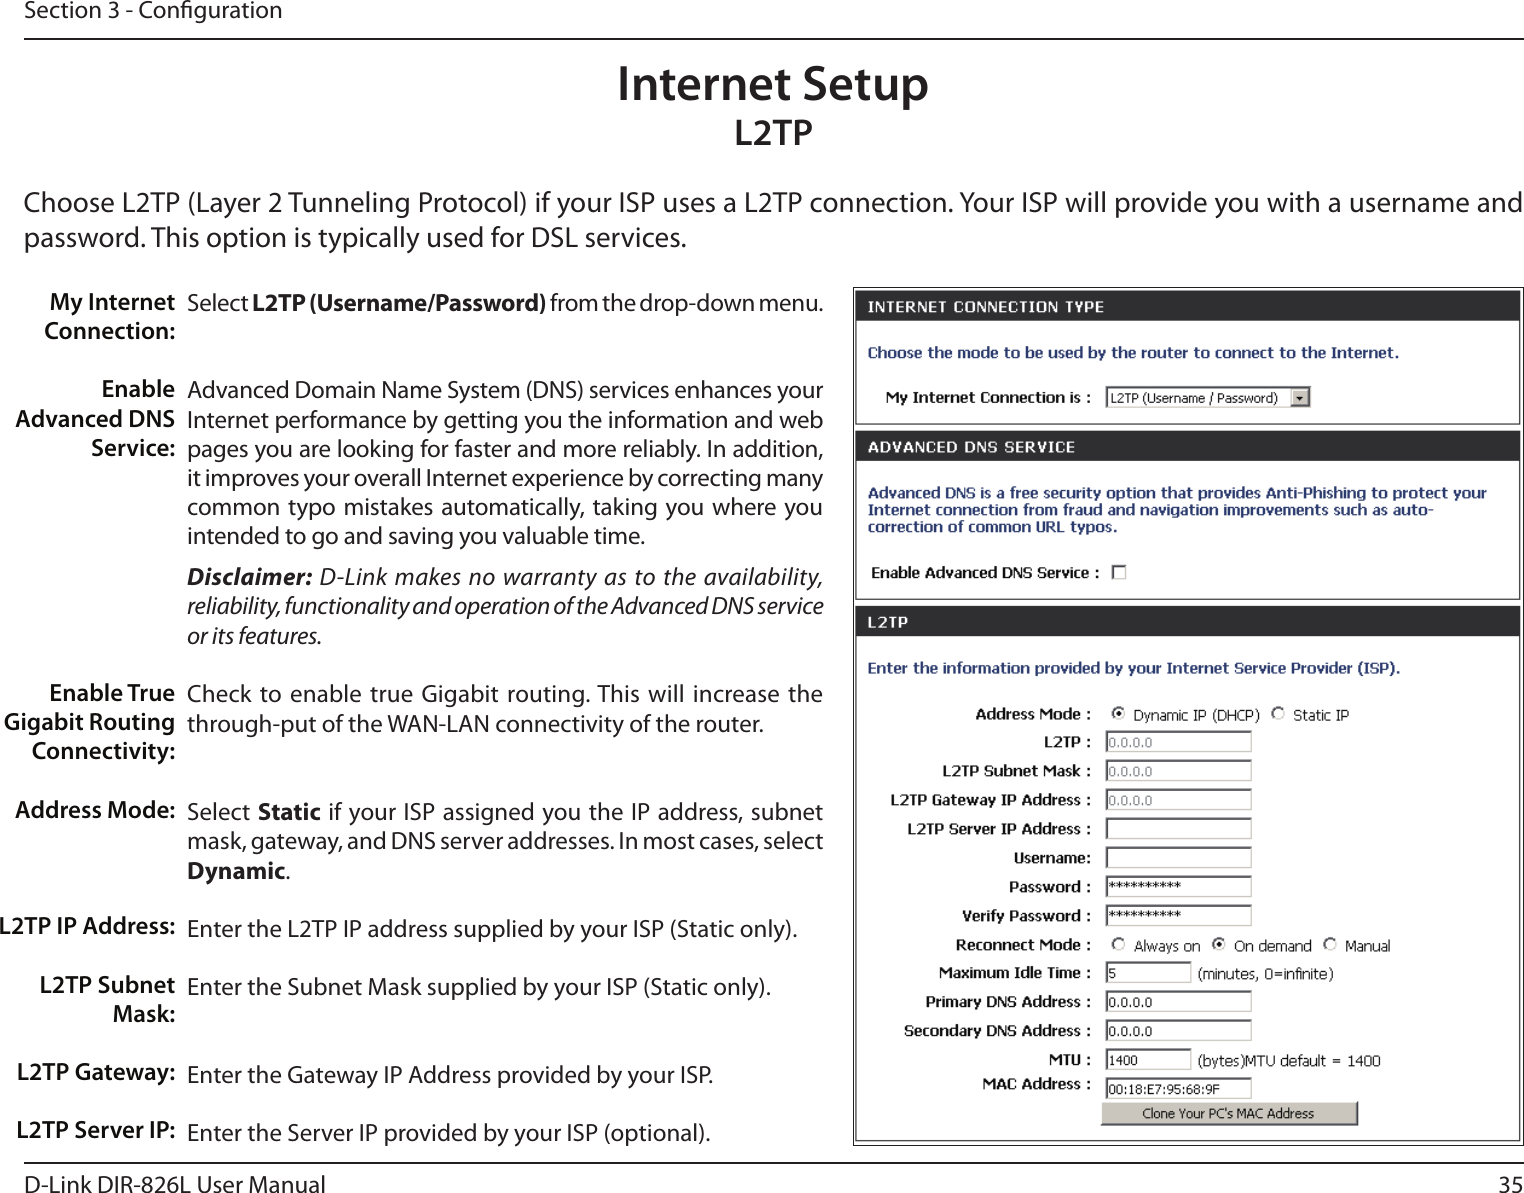 35D-Link DIR-826L User ManualSection 3 - CongurationSelect L2TP (Username/Password) from the drop-down menu.Advanced Domain Name System (DNS) services enhances your Internet performance by getting you the information and web pages you are looking for faster and more reliably. In addition, it improves your overall Internet experience by correcting many common typo mistakes automatically, taking you where you intended to go and saving you valuable time.Disclaimer: D-Link makes no warranty as to the availability, reliability, functionality and operation of the Advanced DNS service or its features.Check to enable true  Gigabit routing. This will increase the through-put of the WAN-LAN connectivity of the router.Select Static if your ISP assigned you the IP address, subnet mask, gateway, and DNS server addresses. In most cases, select Dynamic.Enter the L2TP IP address supplied by your ISP (Static only).Enter the Subnet Mask supplied by your ISP (Static only).Enter the Gateway IP Address provided by your ISP.Enter the Server IP provided by your ISP (optional).My Internet Connection:Enable Advanced DNS Service:Enable True Gigabit Routing Connectivity:Address Mode:L2TP IP Address:L2TP Subnet Mask:L2TP Gateway:L2TP Server IP:Internet SetupL2TPChoose L2TP (Layer 2 Tunneling Protocol) if your ISP uses a L2TP connection. Your ISP will provide you with a username and password. This option is typically used for DSL services. 